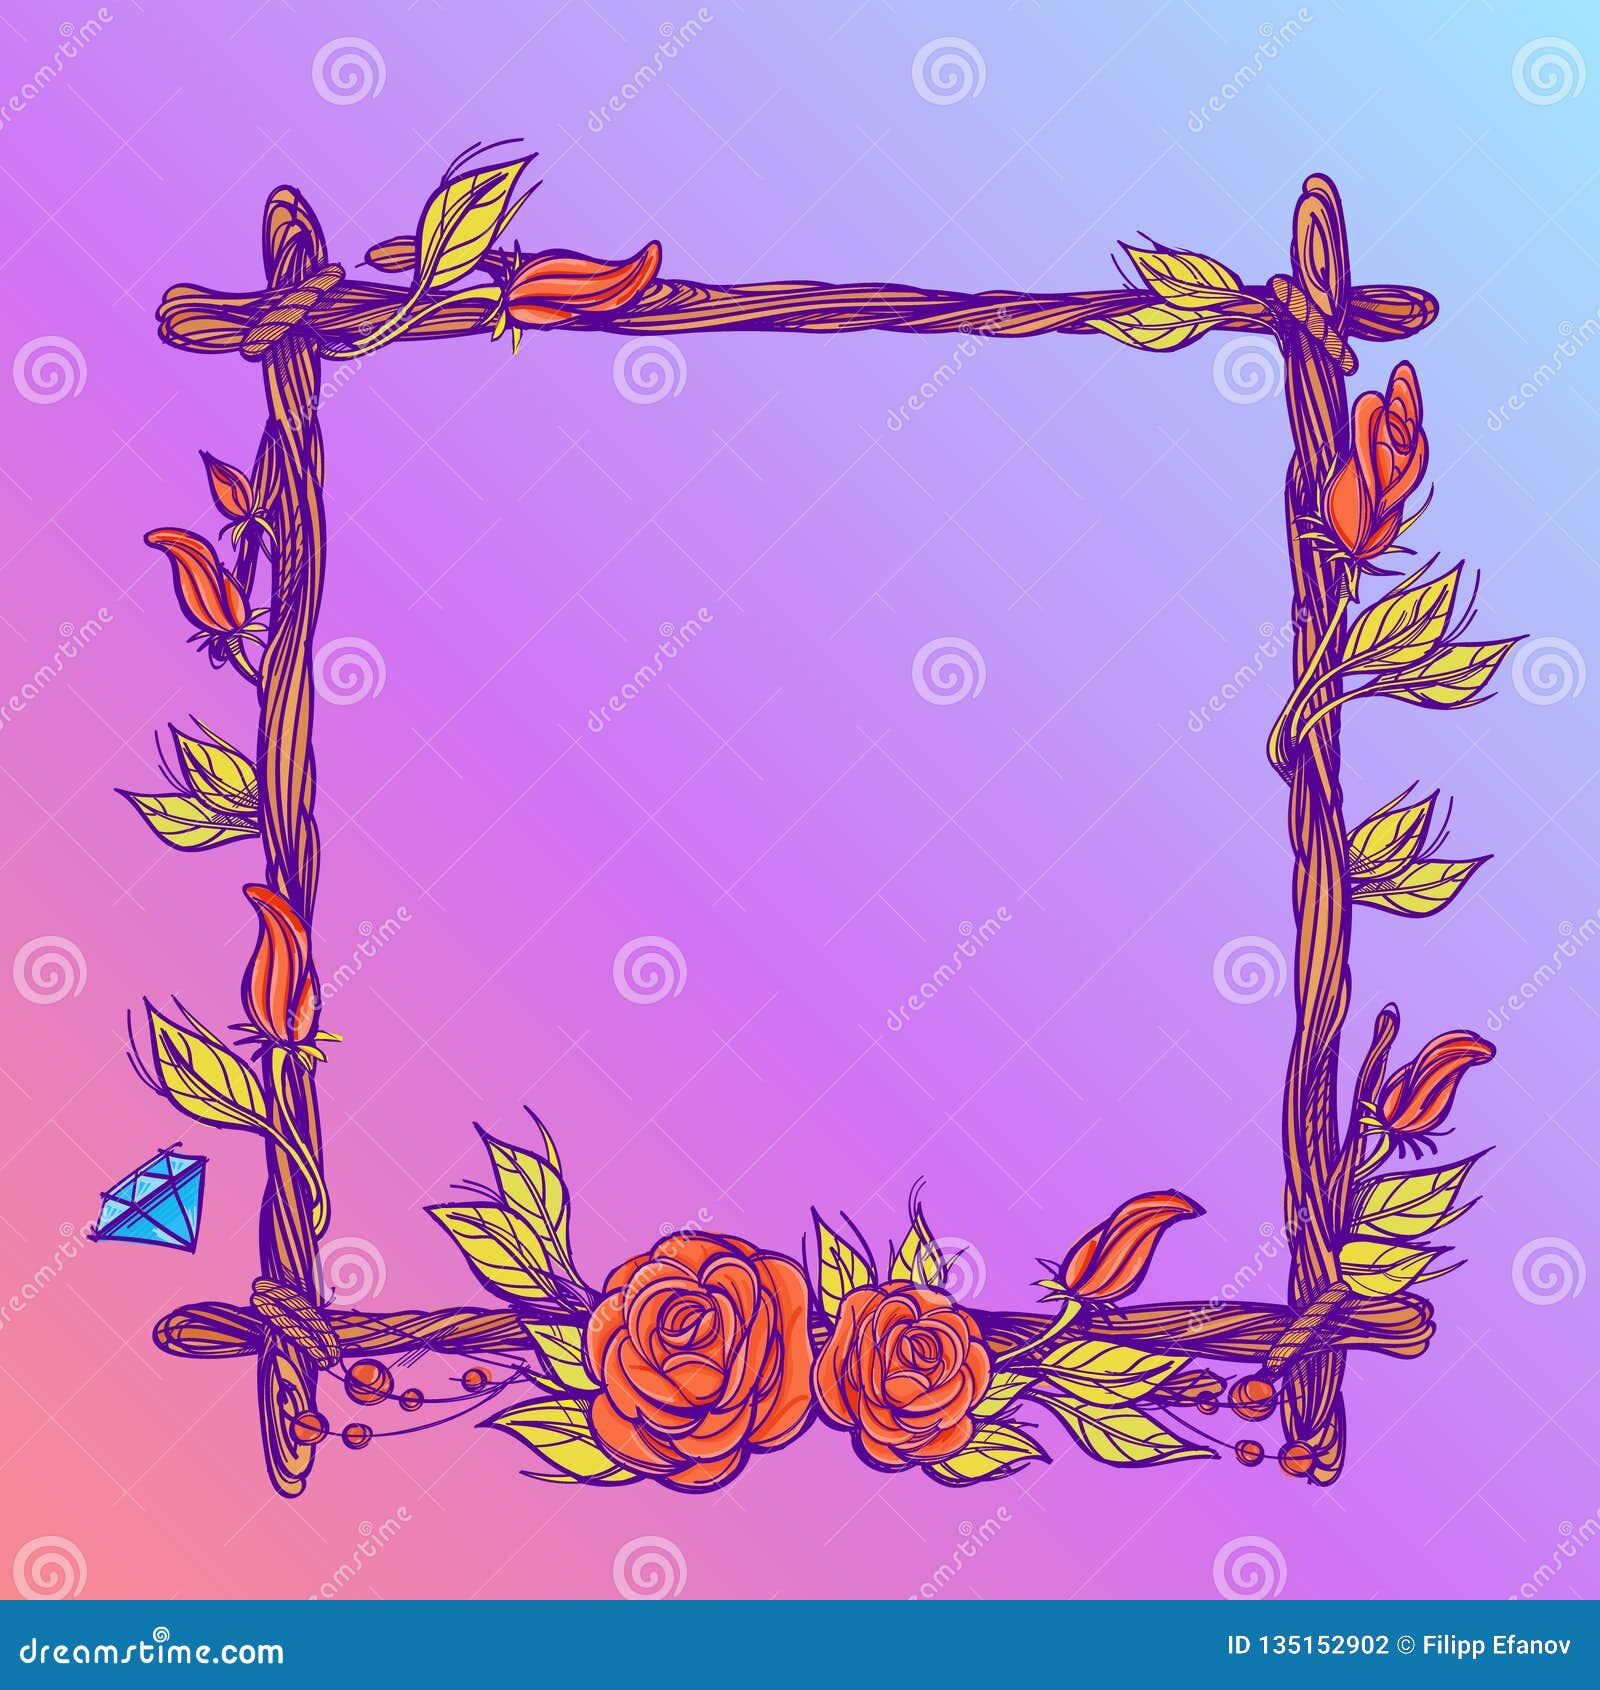 Square Frame Made of Branches with Roses and Flower Buds. Decorative